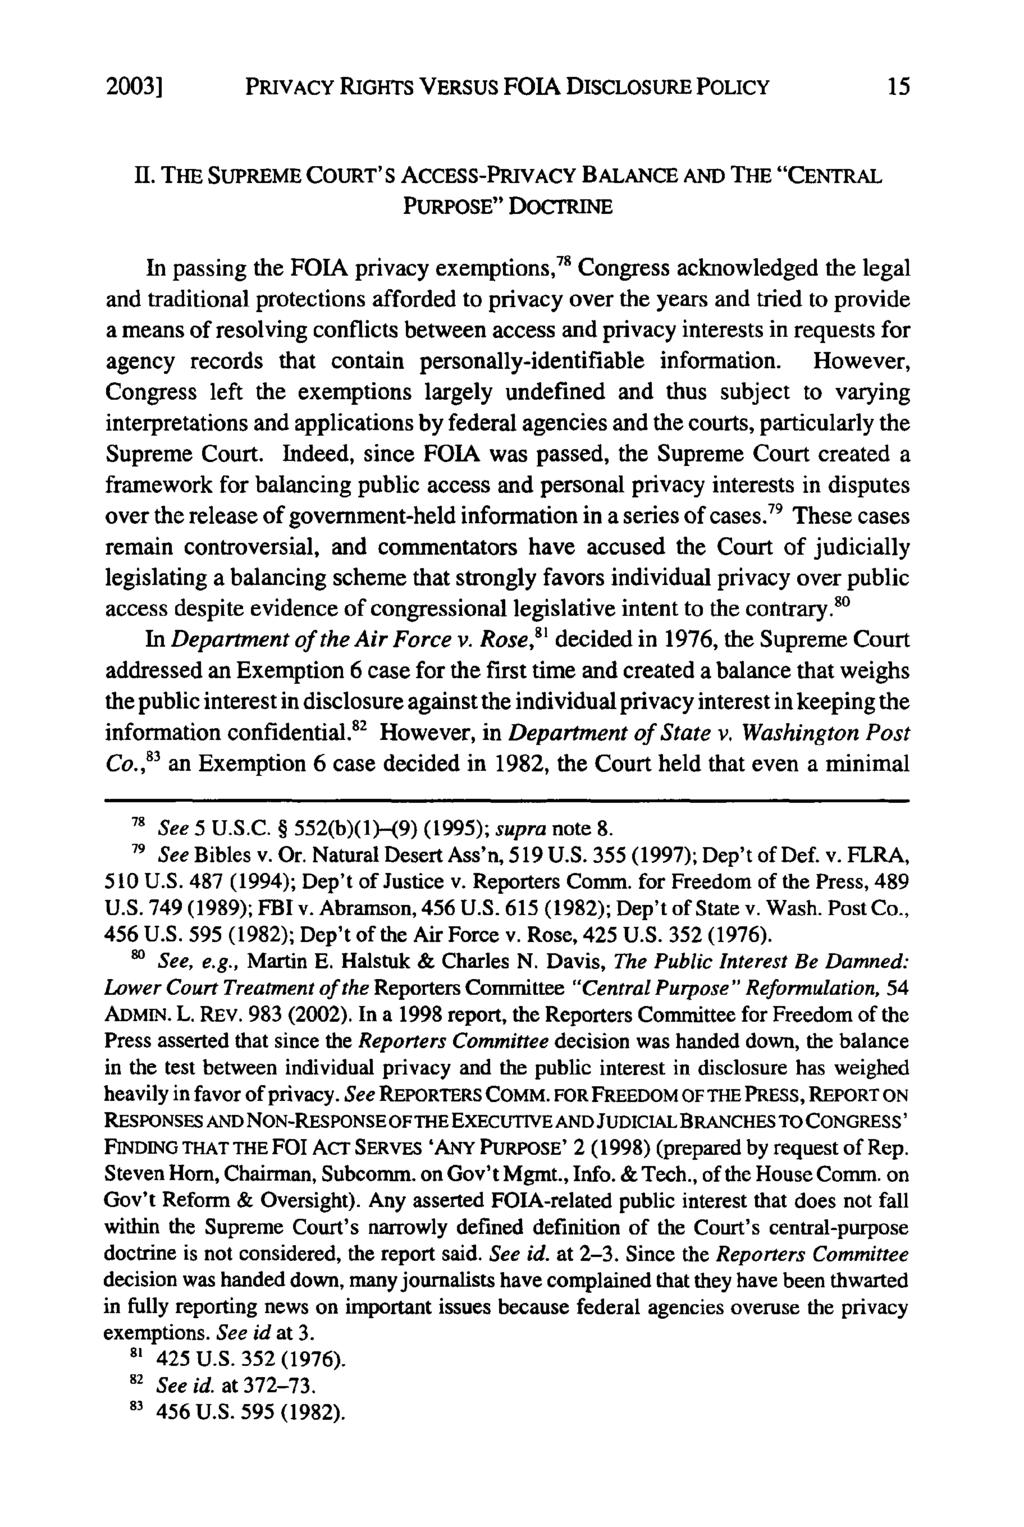 2003] PRIVACY RIGHTS VERSUS FOIA DISCLOSURE POLICY II.